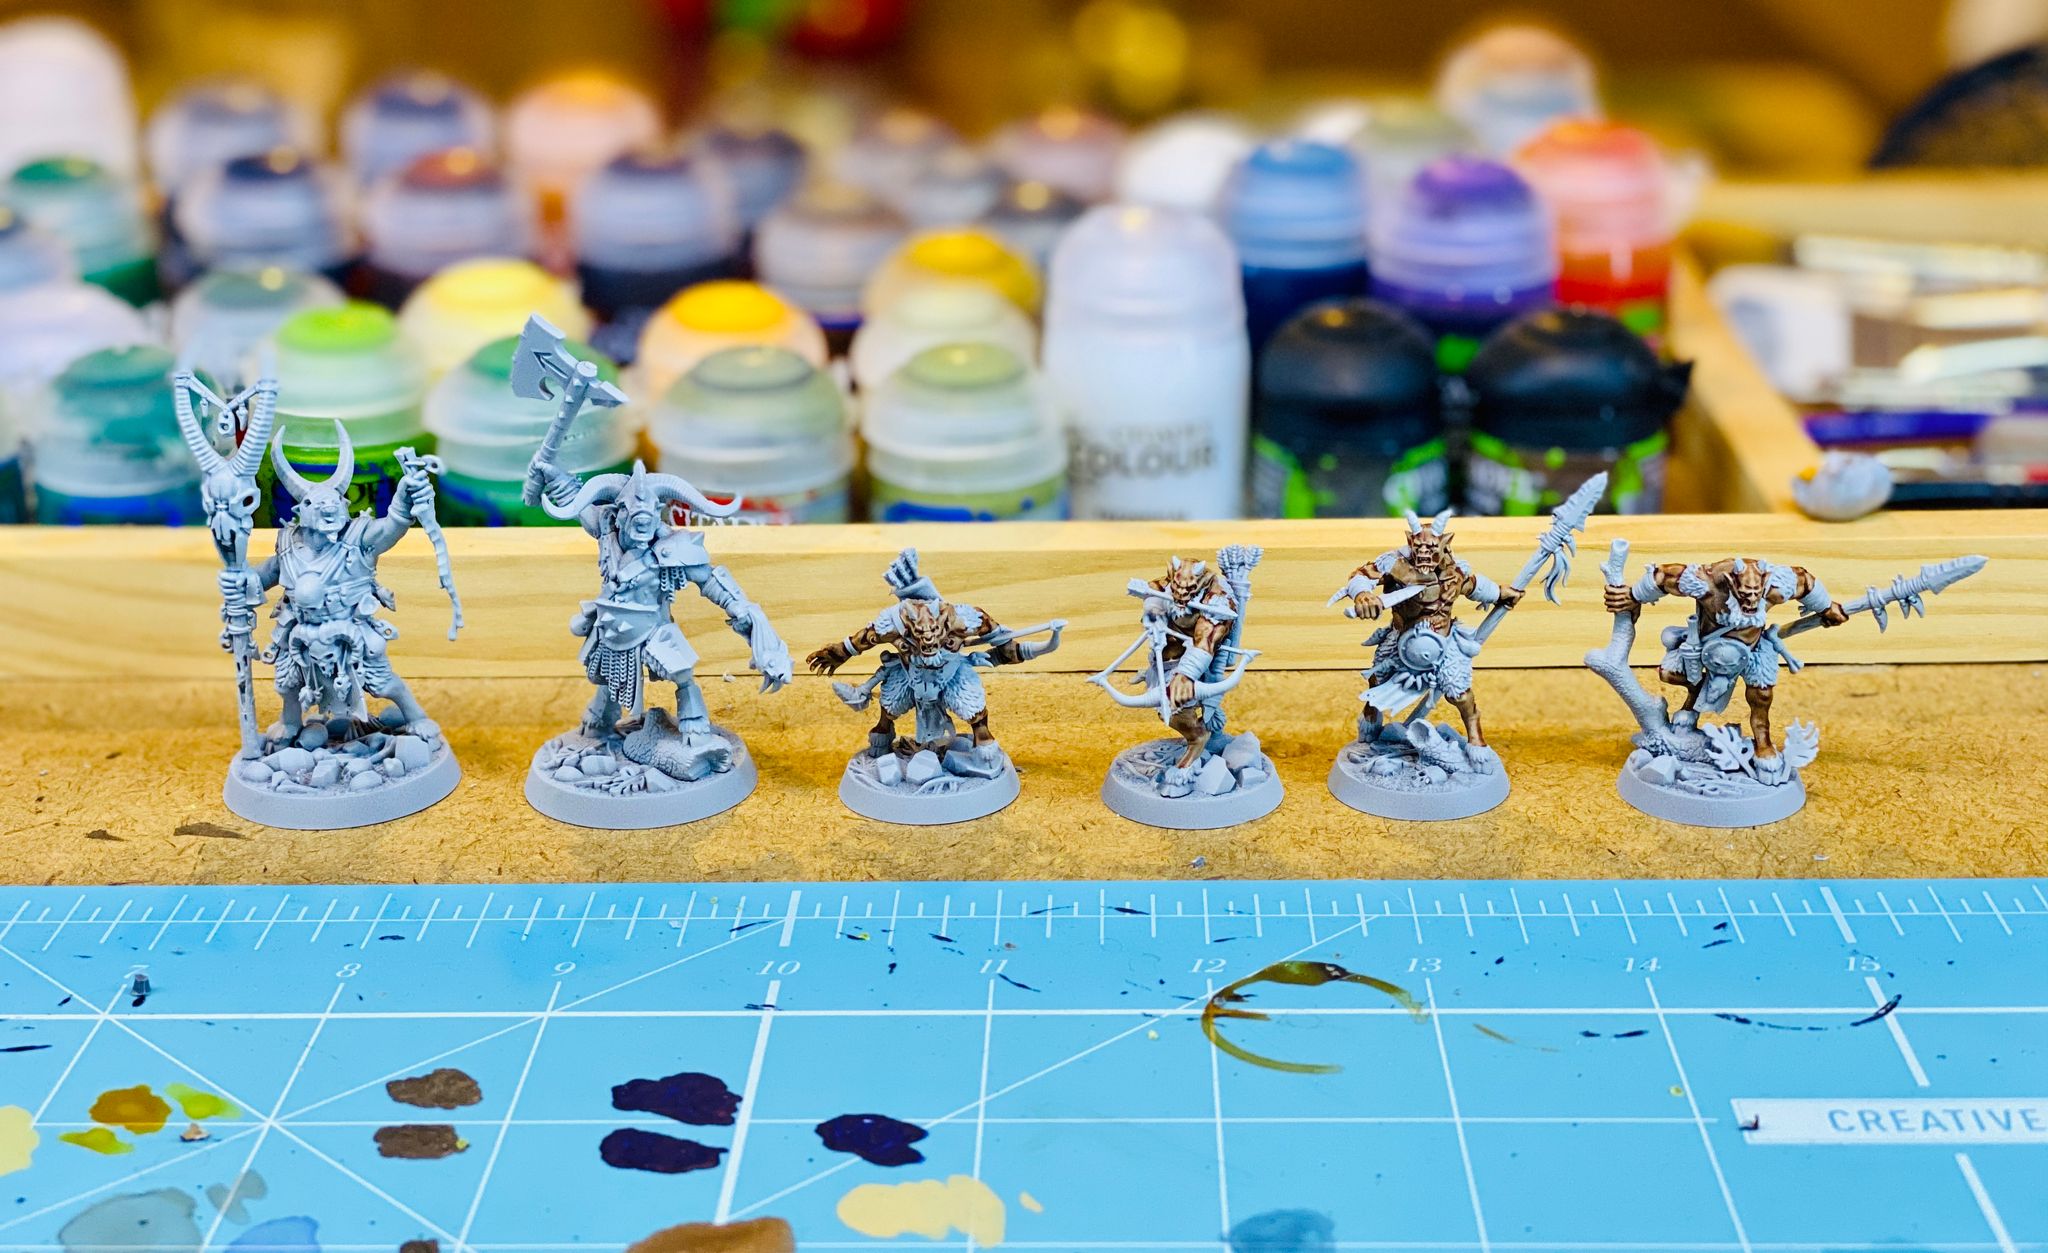 A row of six goatmen miniatures from Games Workshop's Warhammer Underworlds: Beastgrave. They're undercoated light grey, two are larger and more ferocious-looking, and the four smaller ones have their bare skin painted in a darkish flesh colour.